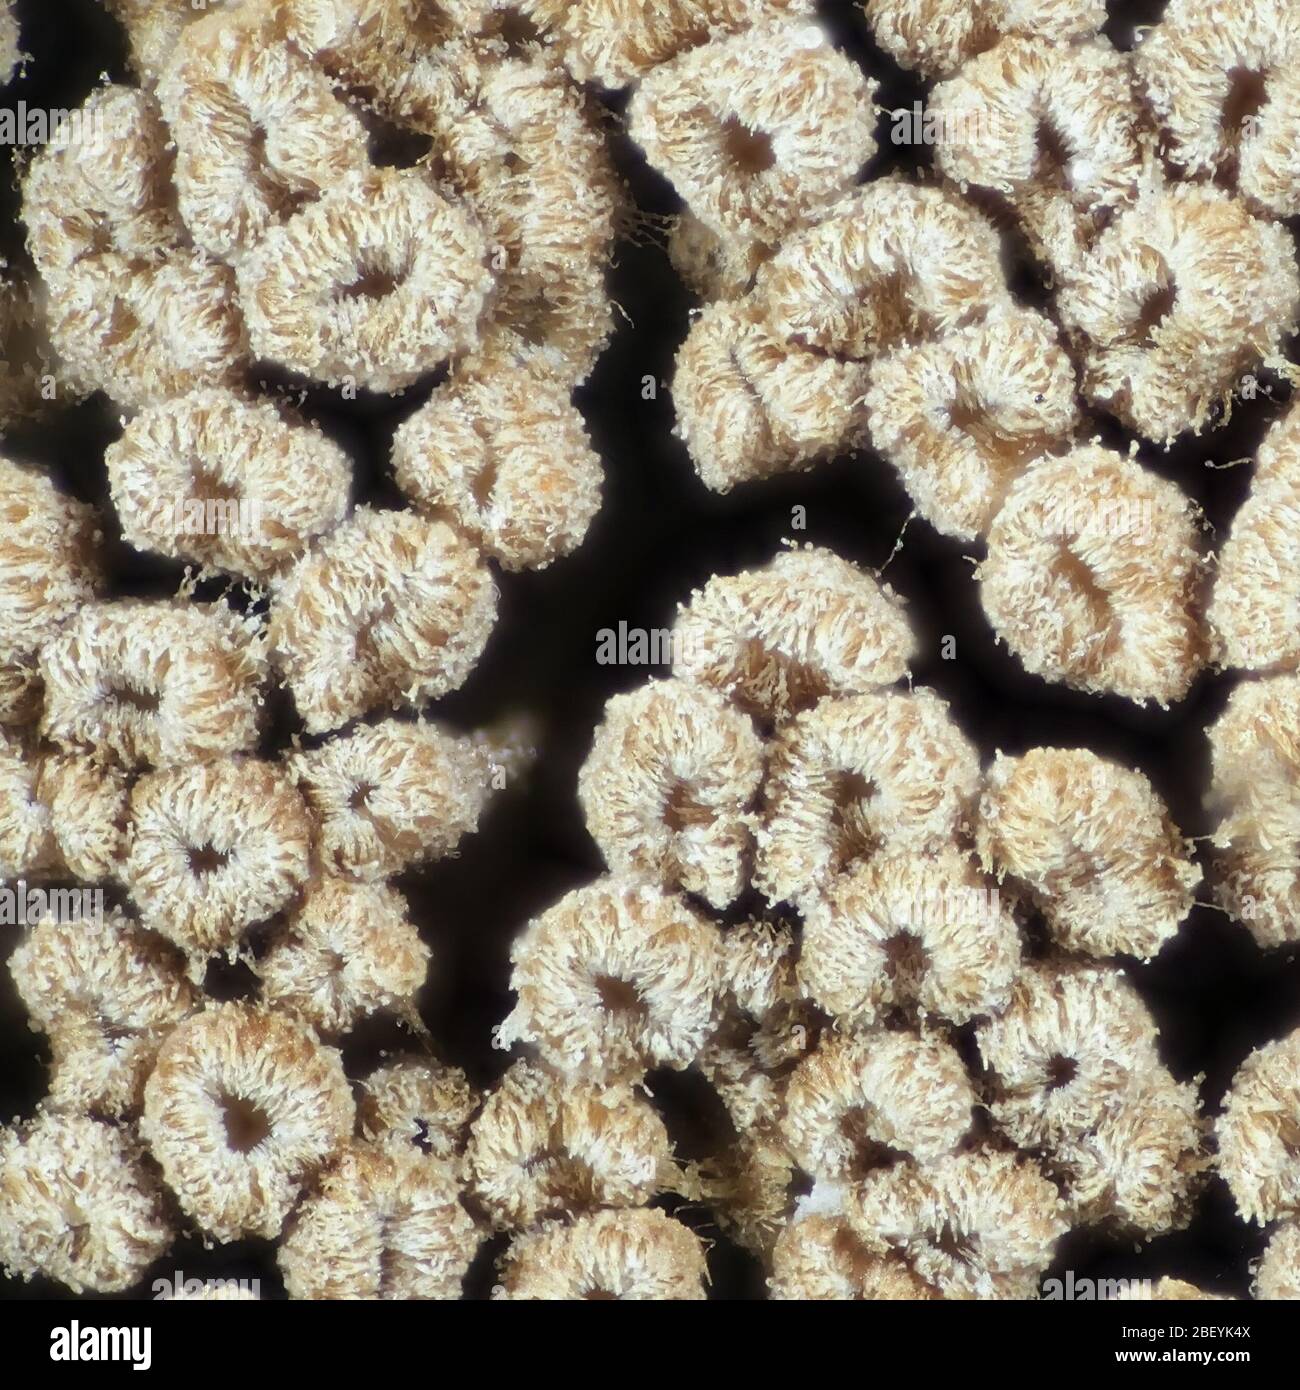 Merismodes anomala, a little cup-shaped cyphelloid fungus, forming packed growths with tiny fruit bodies Stock Photo